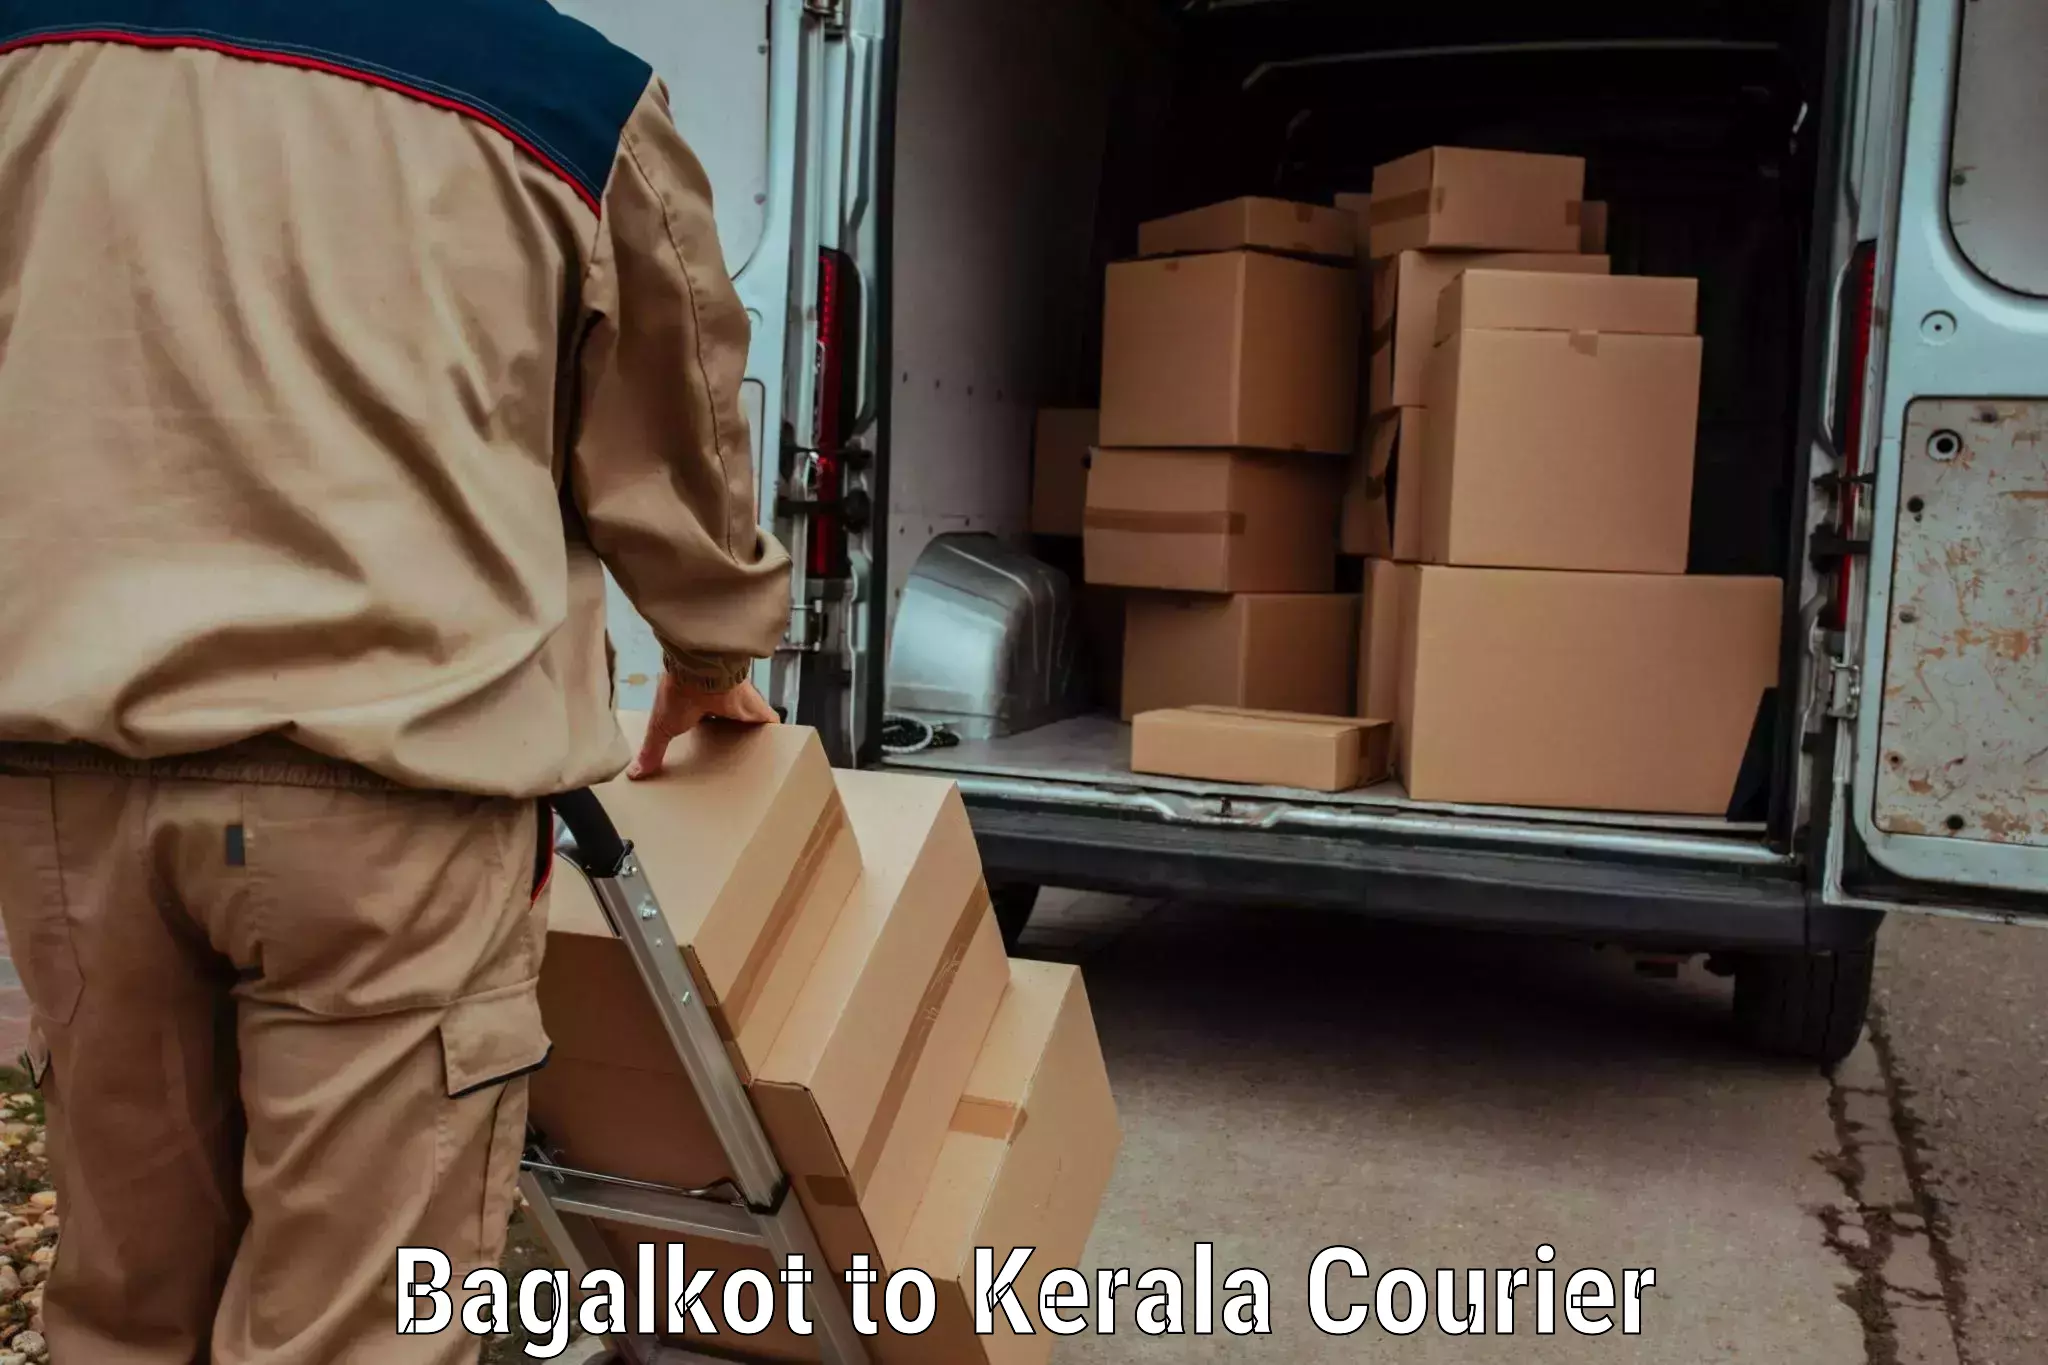 Speedy delivery service Bagalkot to Kanhangad